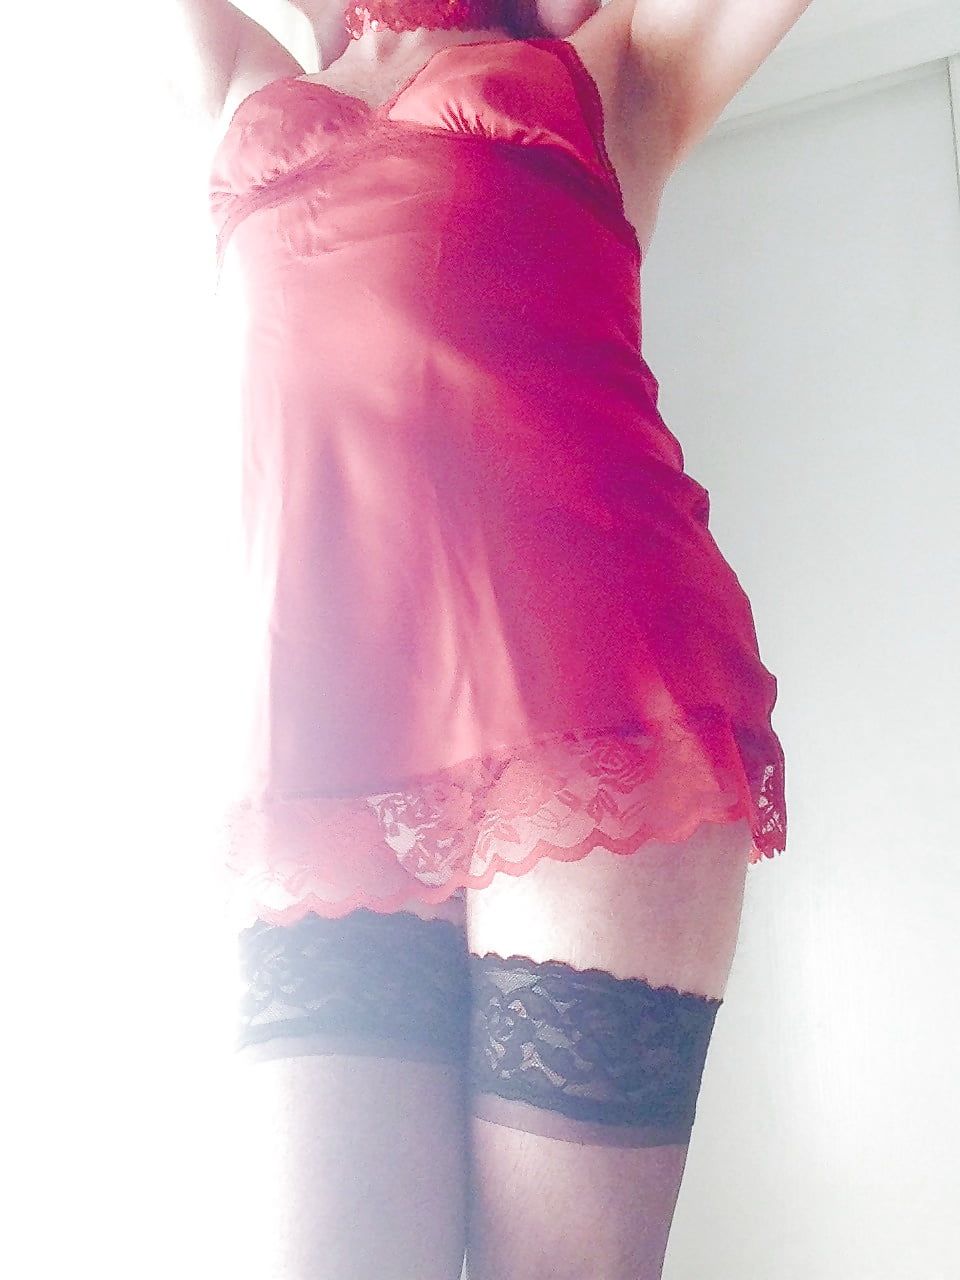 New sexy red satin lingerie and black stockings  #7